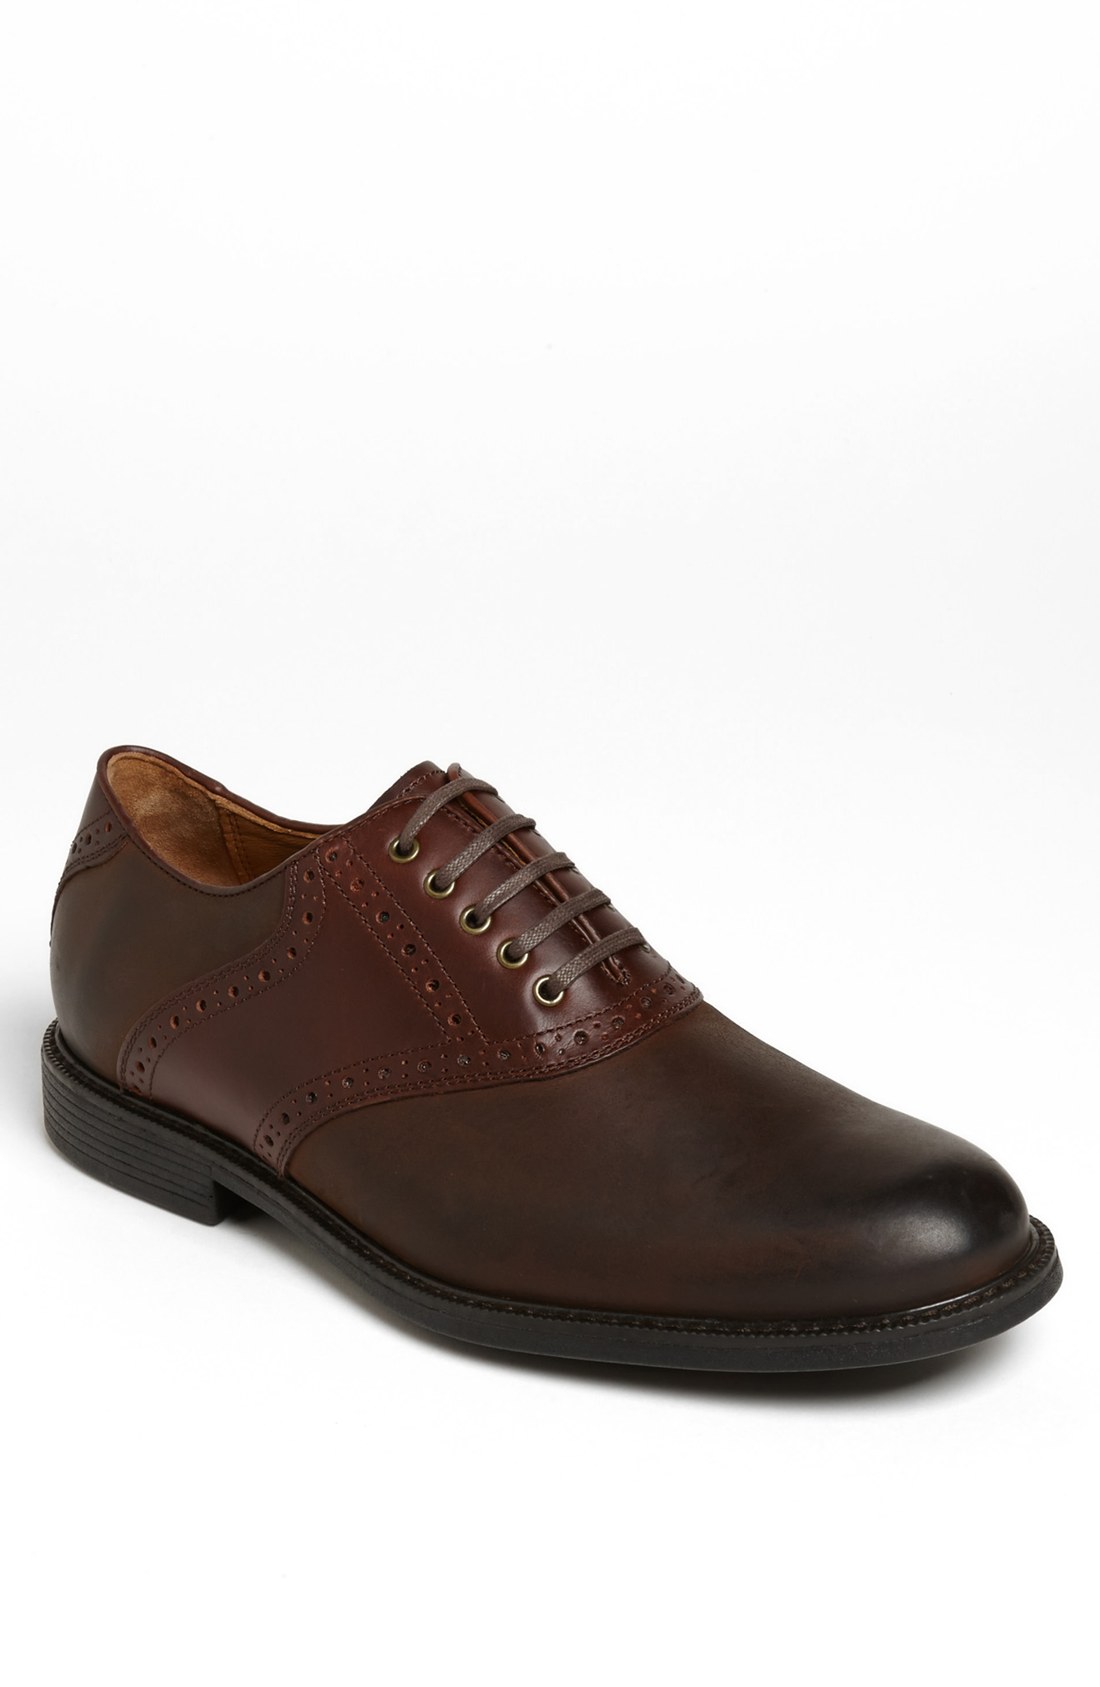 Johnston  Murphy 'Cardell' Waterproof Saddle Oxford in Brown for Men ...